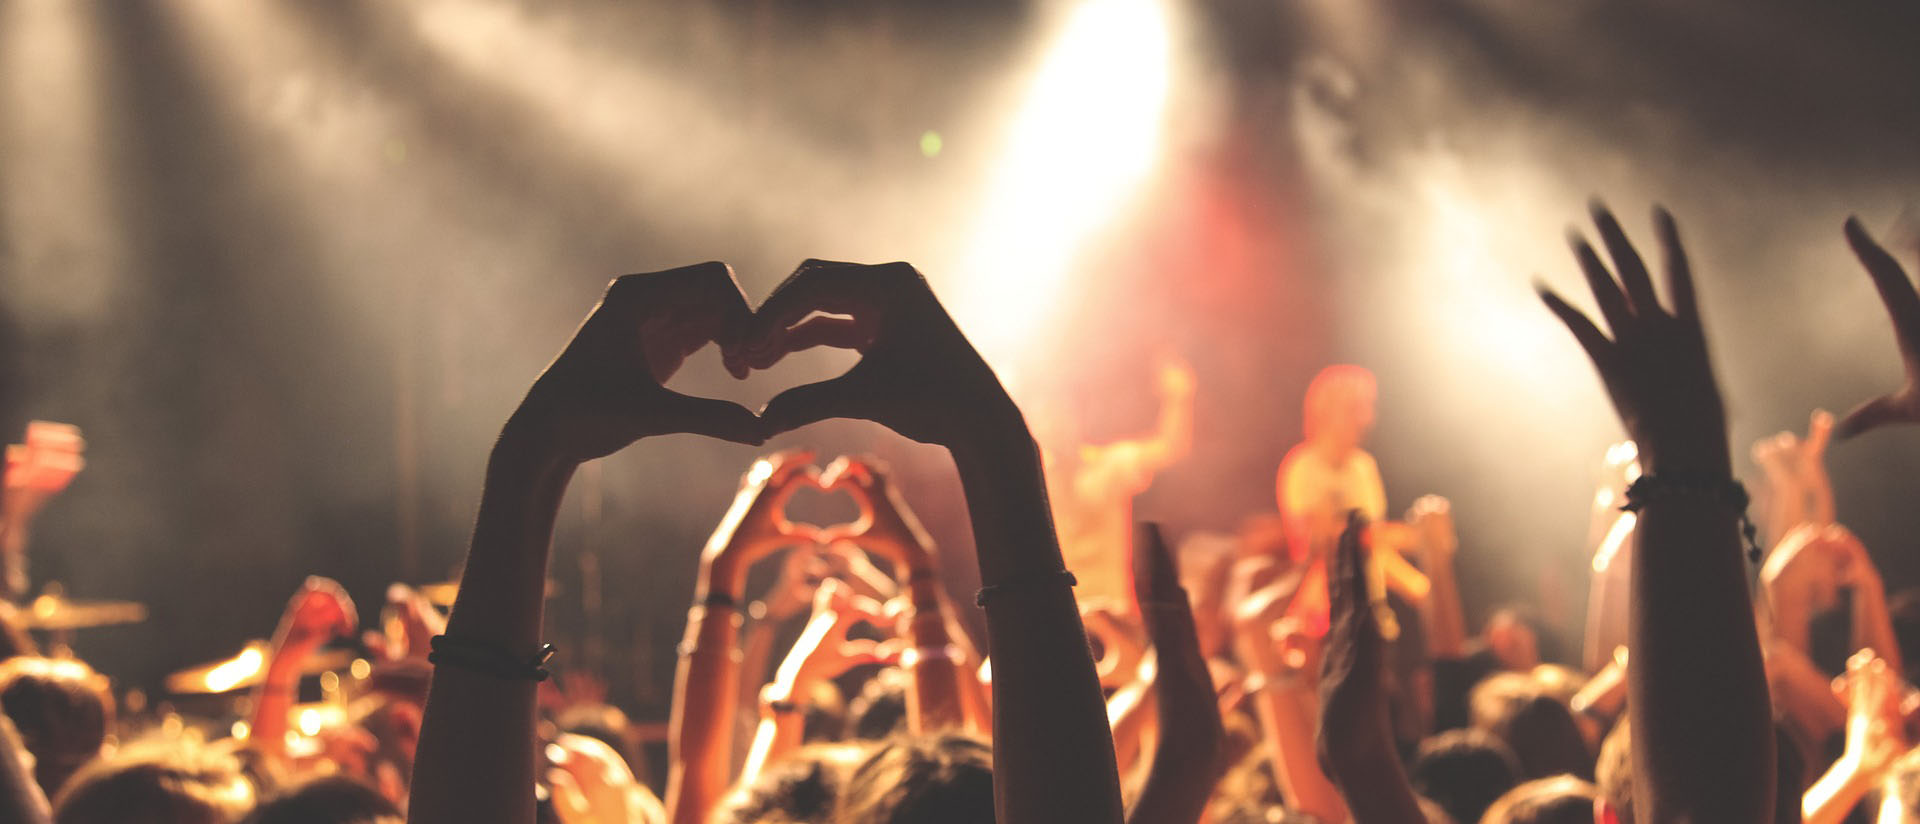 Gig goers making a heart symbol with their hands